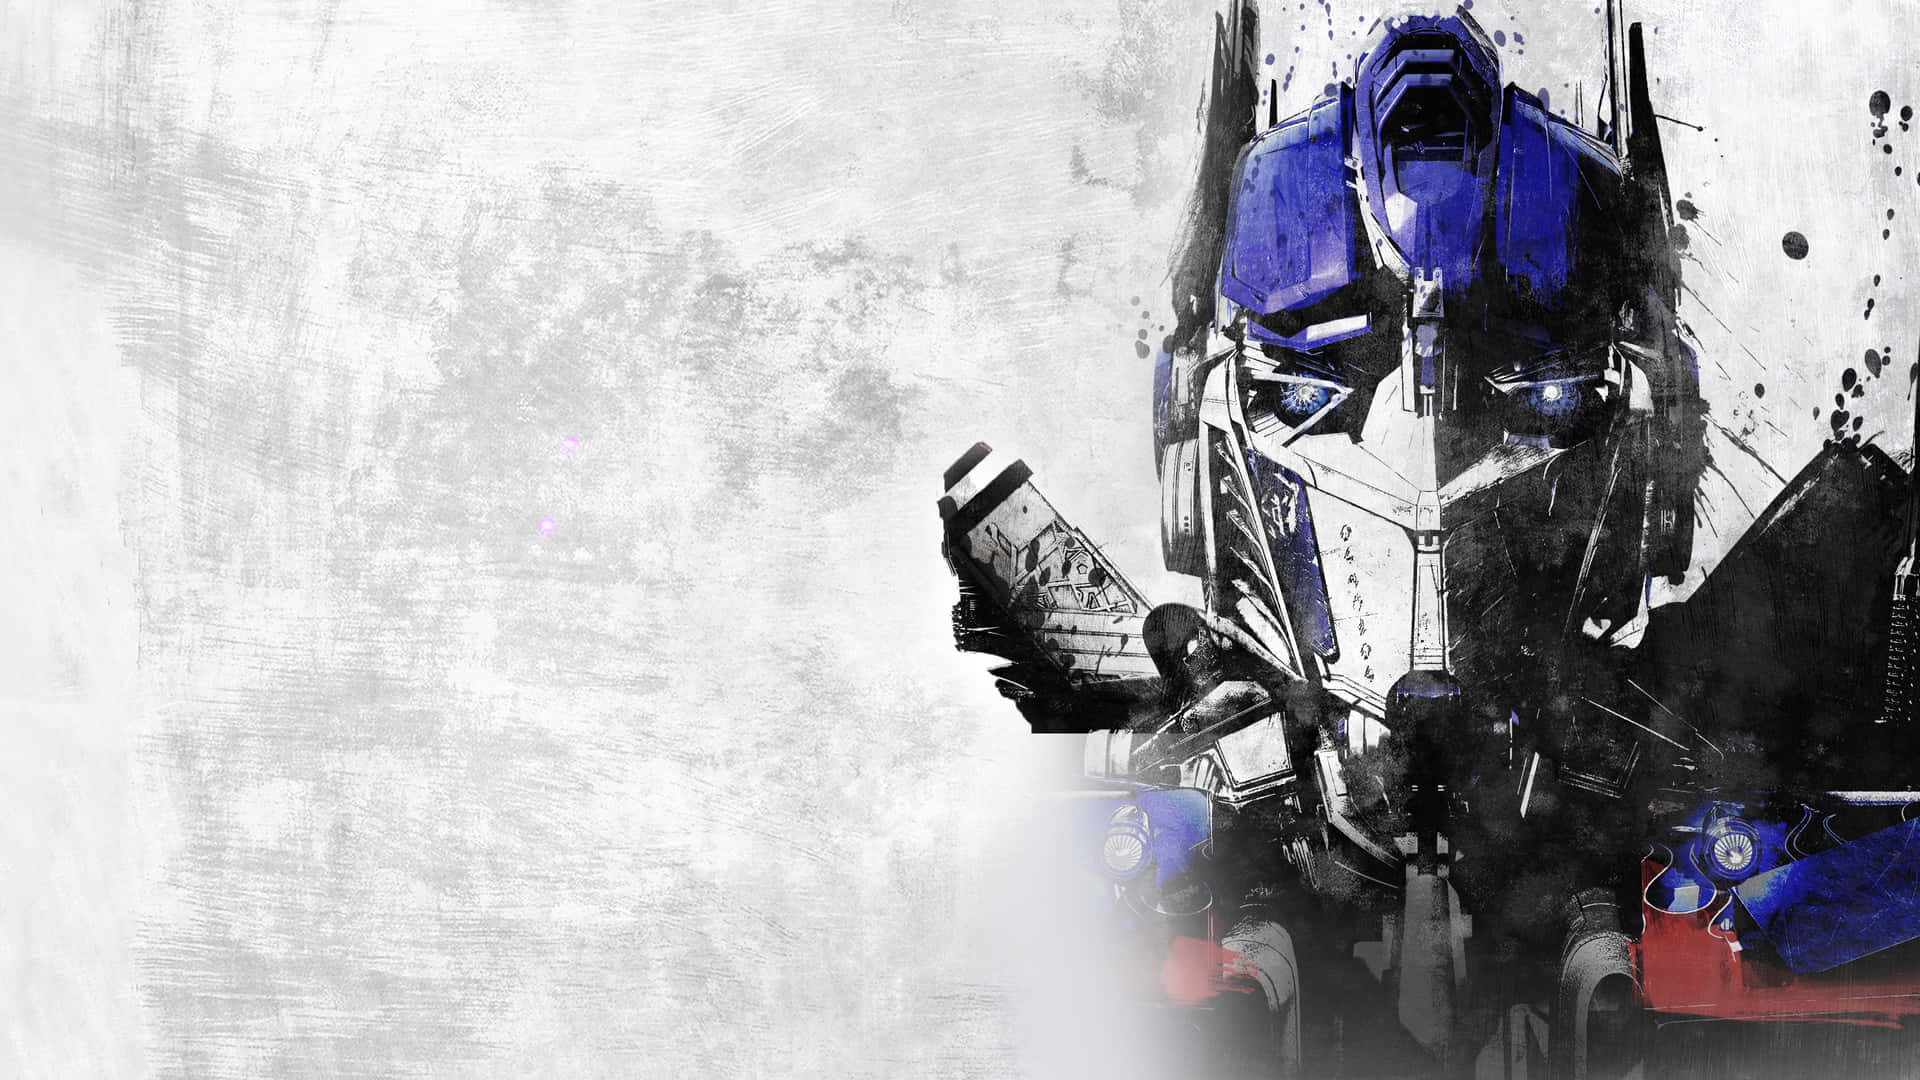 Join the ranks of the Autobots with this jaw-dropping Optimus Prime 4K wallpaper. Wallpaper